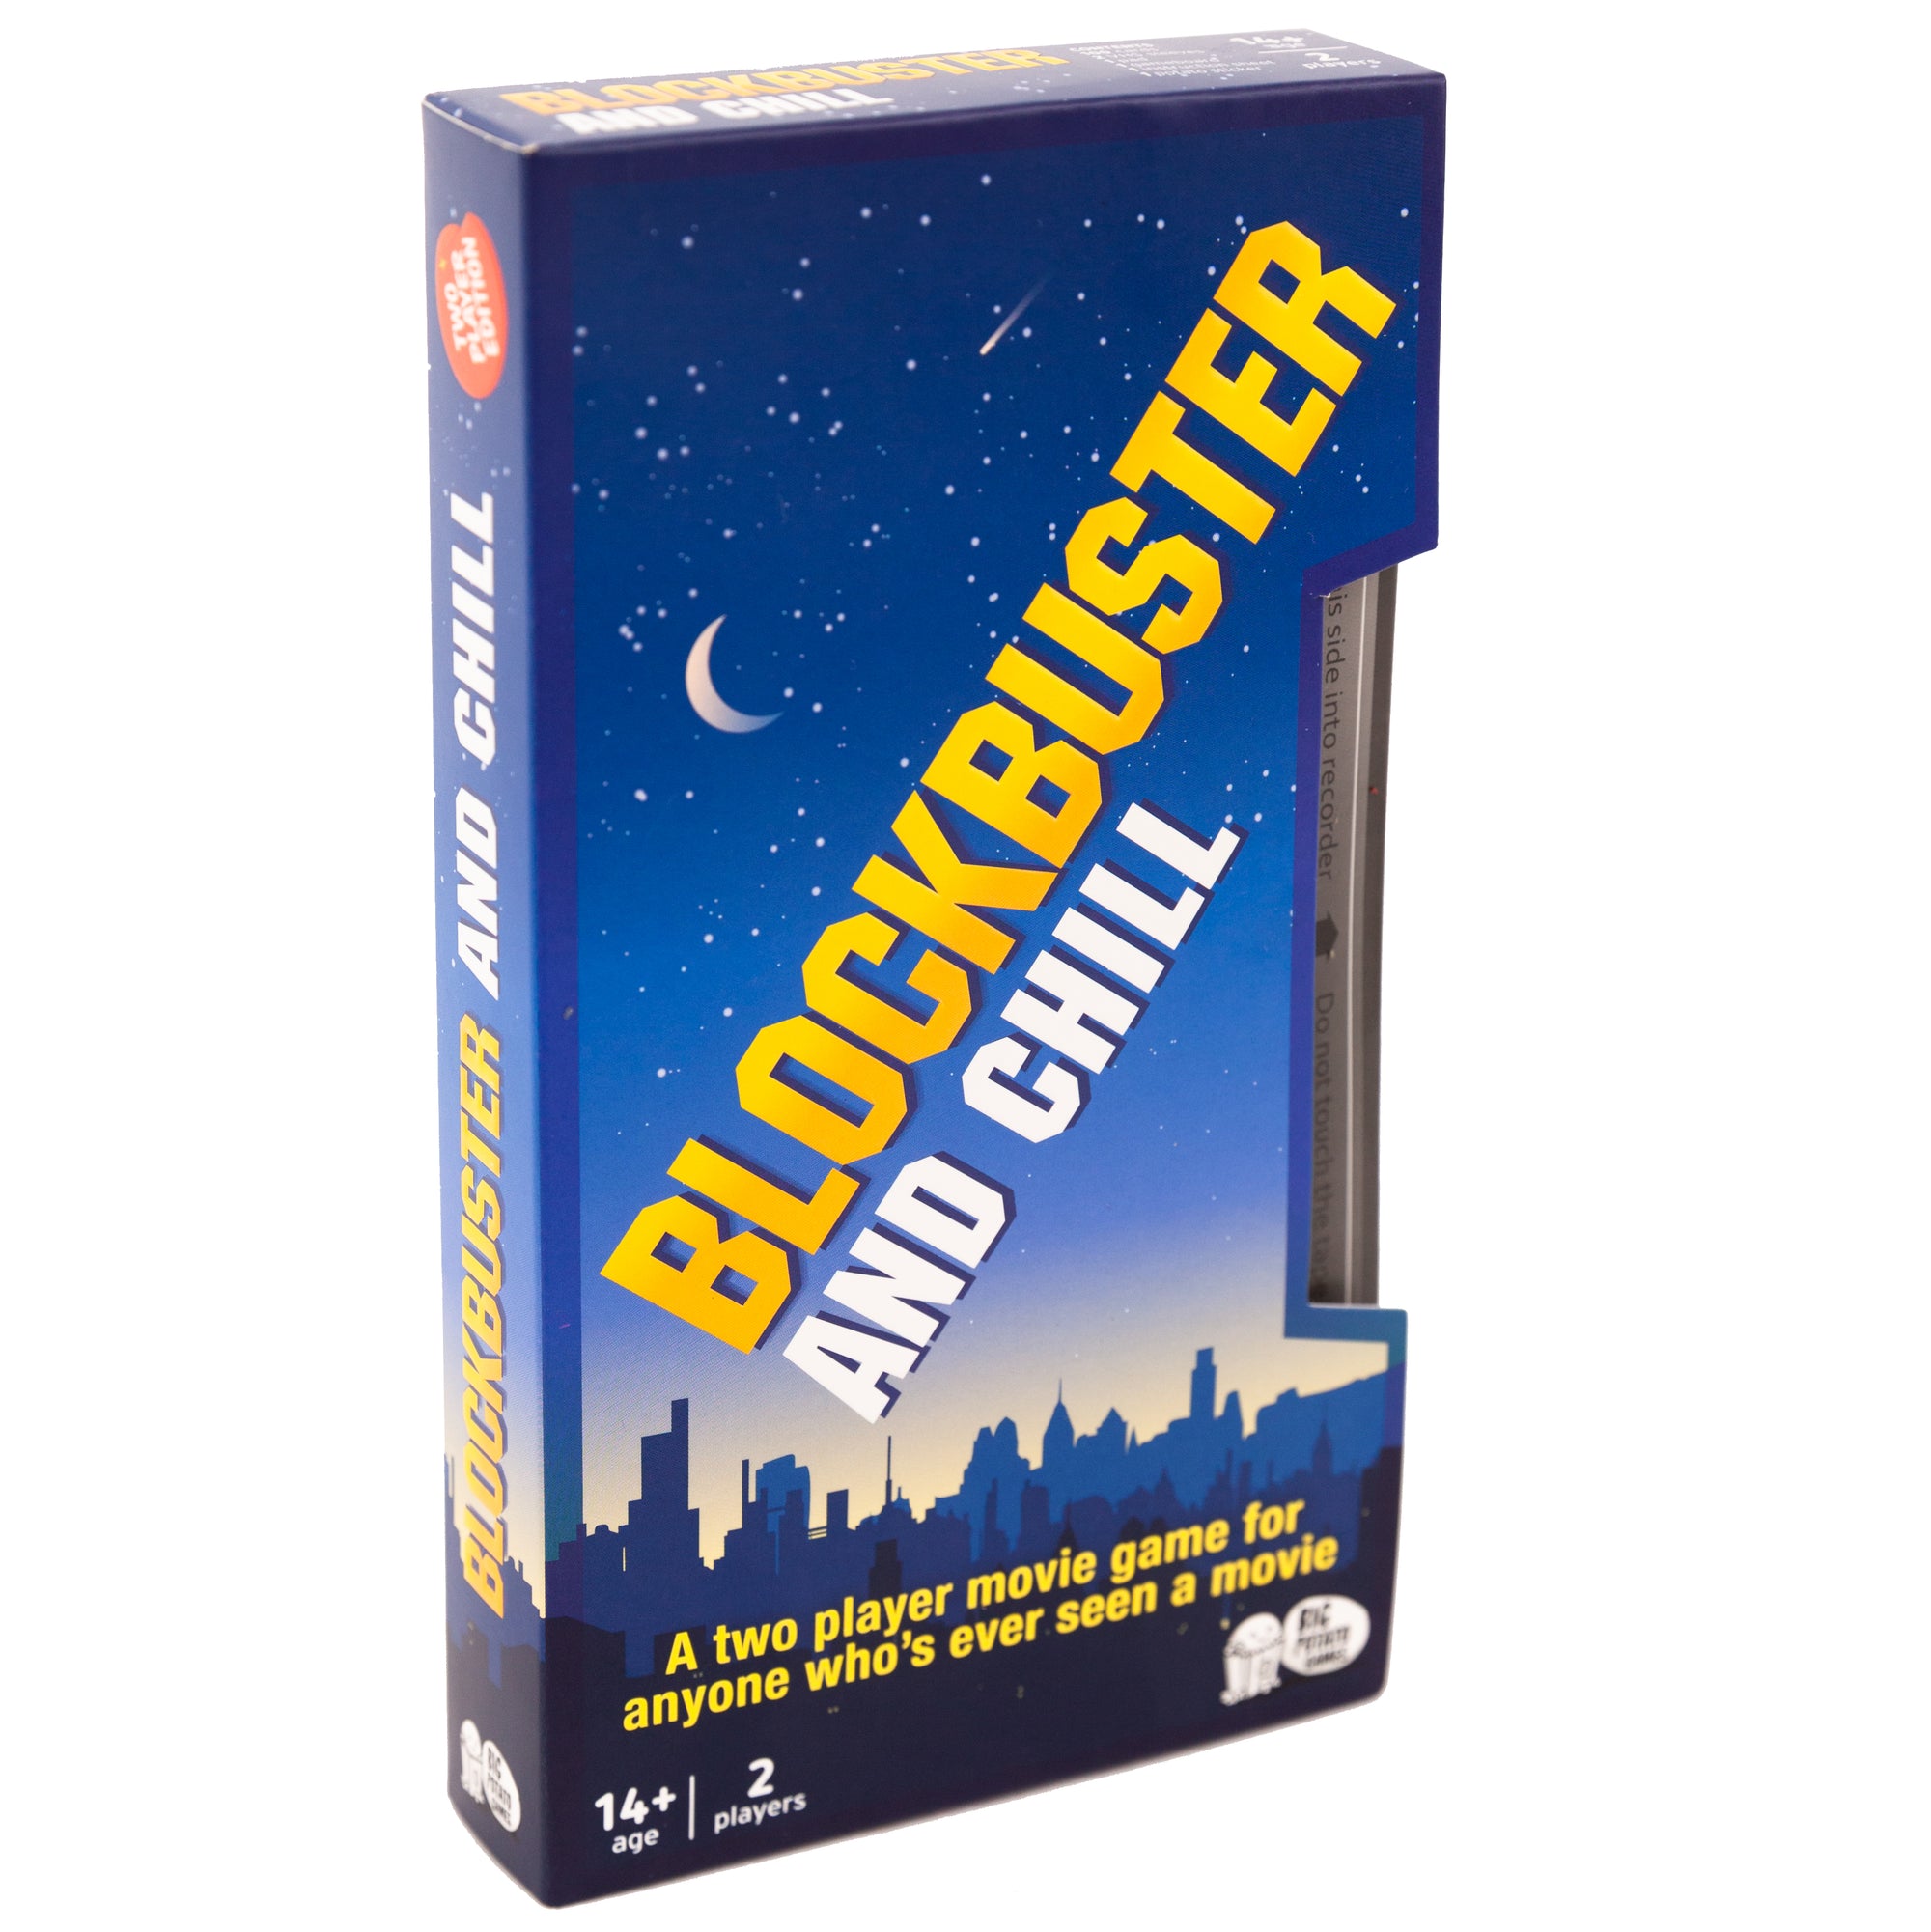 A board game packaged in a VHS tape sleeve. The sleeve shows a nighttime city skyline and big yellow block capitals saying 'BLOCKBUSTER AND CHILL'. Below this is smaller writing stating 'a two player movie game for anyone who's ever seen a movie'.